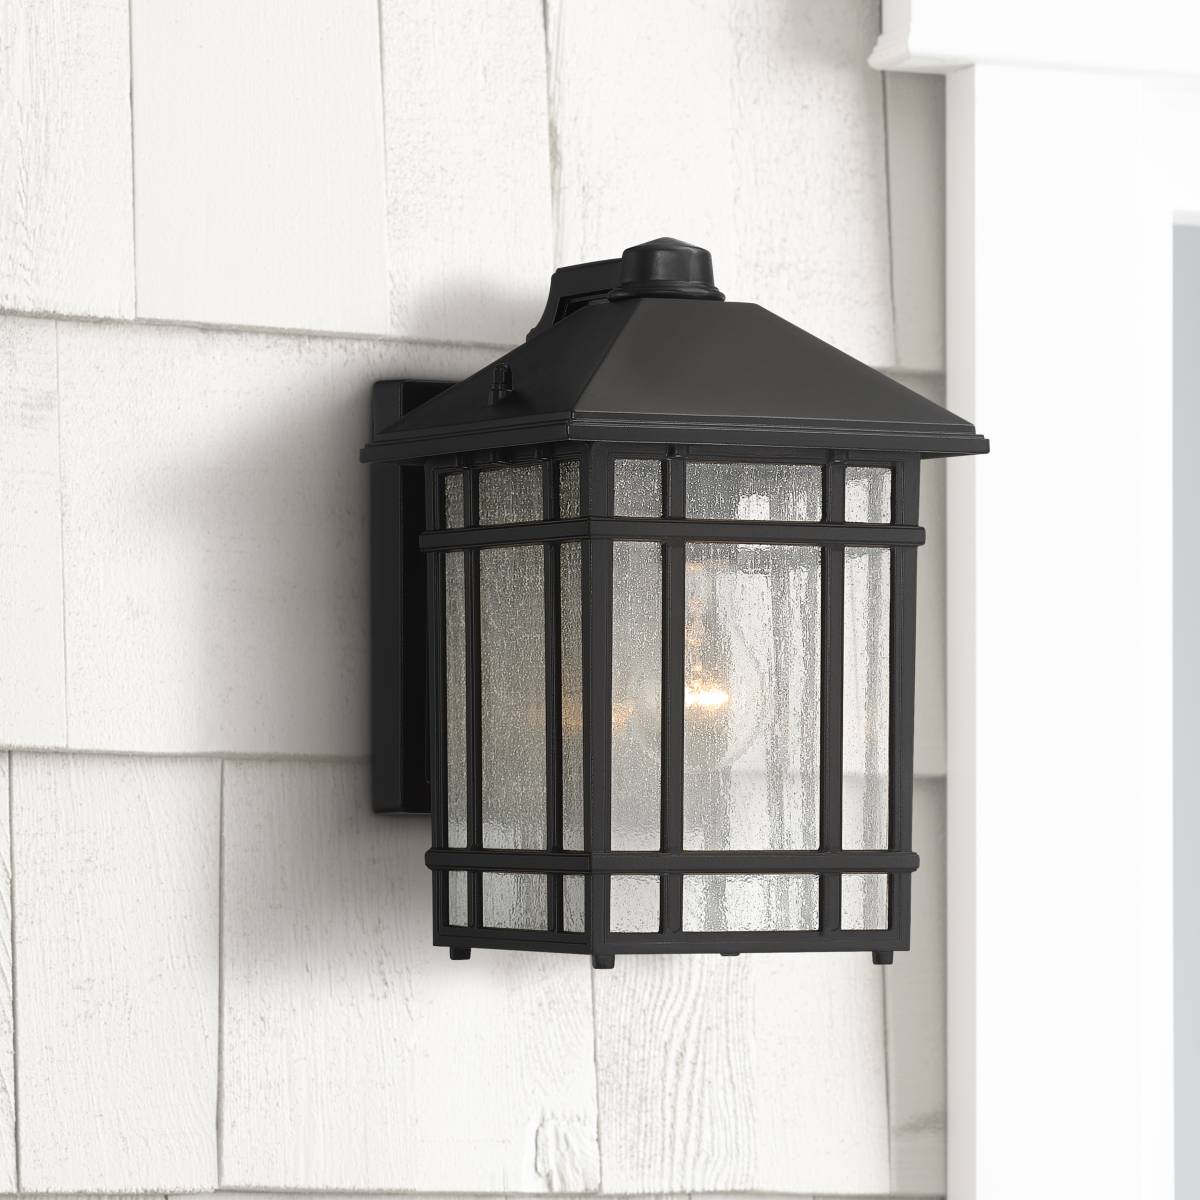 Outdoor Dusk to Dawn Lights - Outdoor Lighting - Page 2 | Lamps Plus